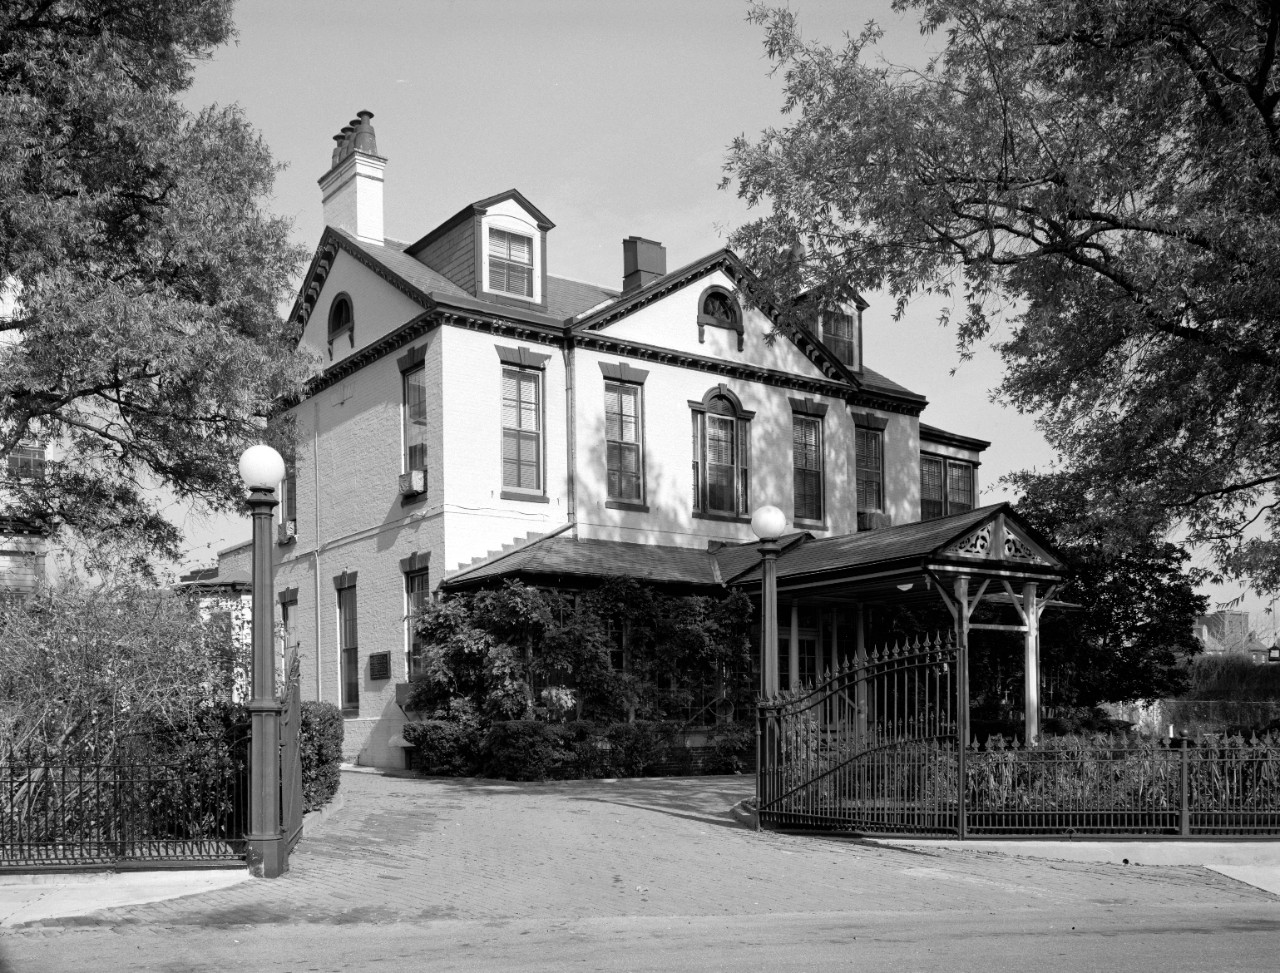 HABS-DC-WASH-74A-3:    Tingey House, Washington Navy Yard, 1936.   Historic American Buildings Survey photograph.   Courtesy of the Library of Congress.   